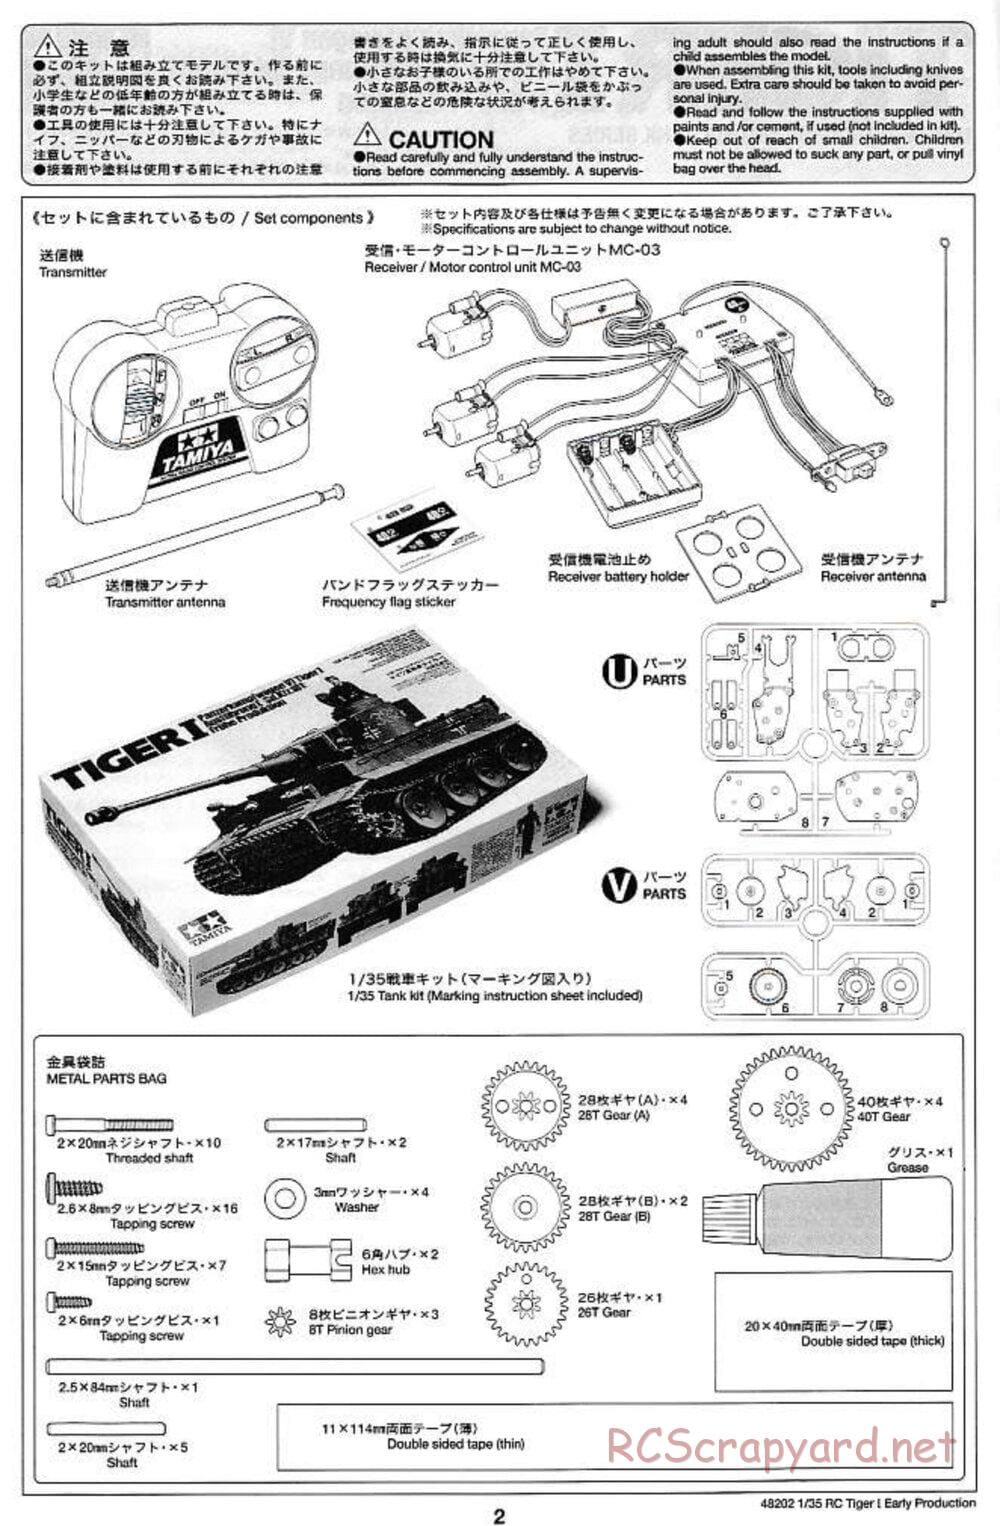 Tamiya - German Tiger 1 Early Production - 1/35 Scale Chassis - Manual - Page 2